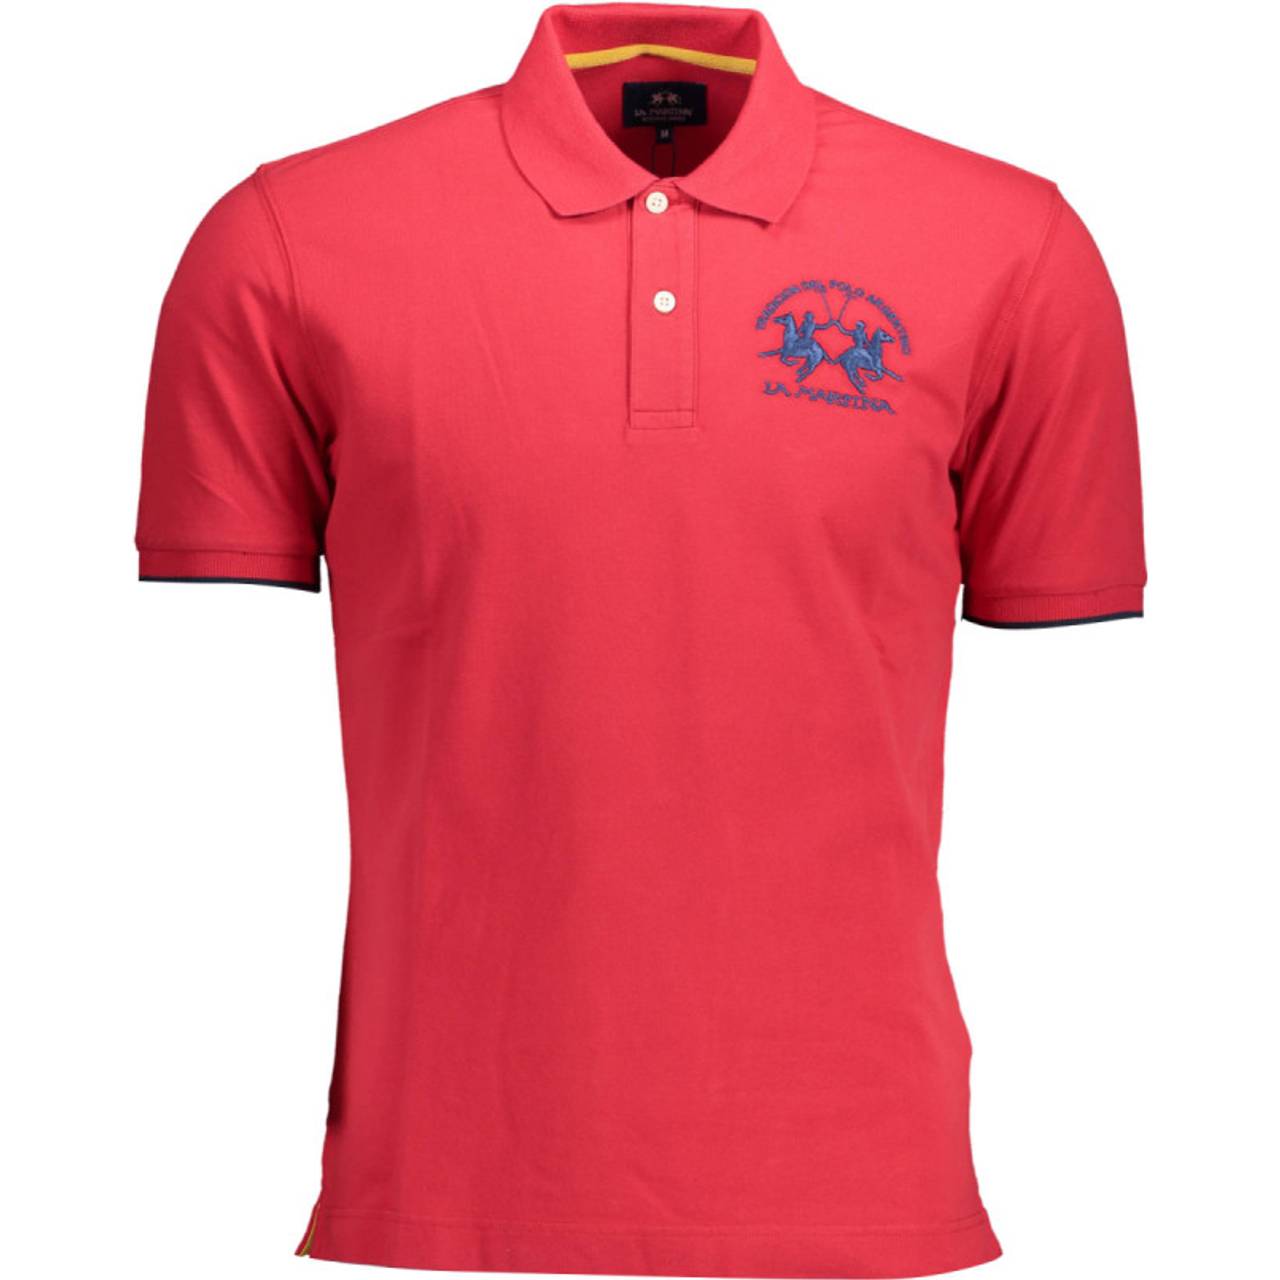 La Martina Polo Shirt - Red • See best prices today